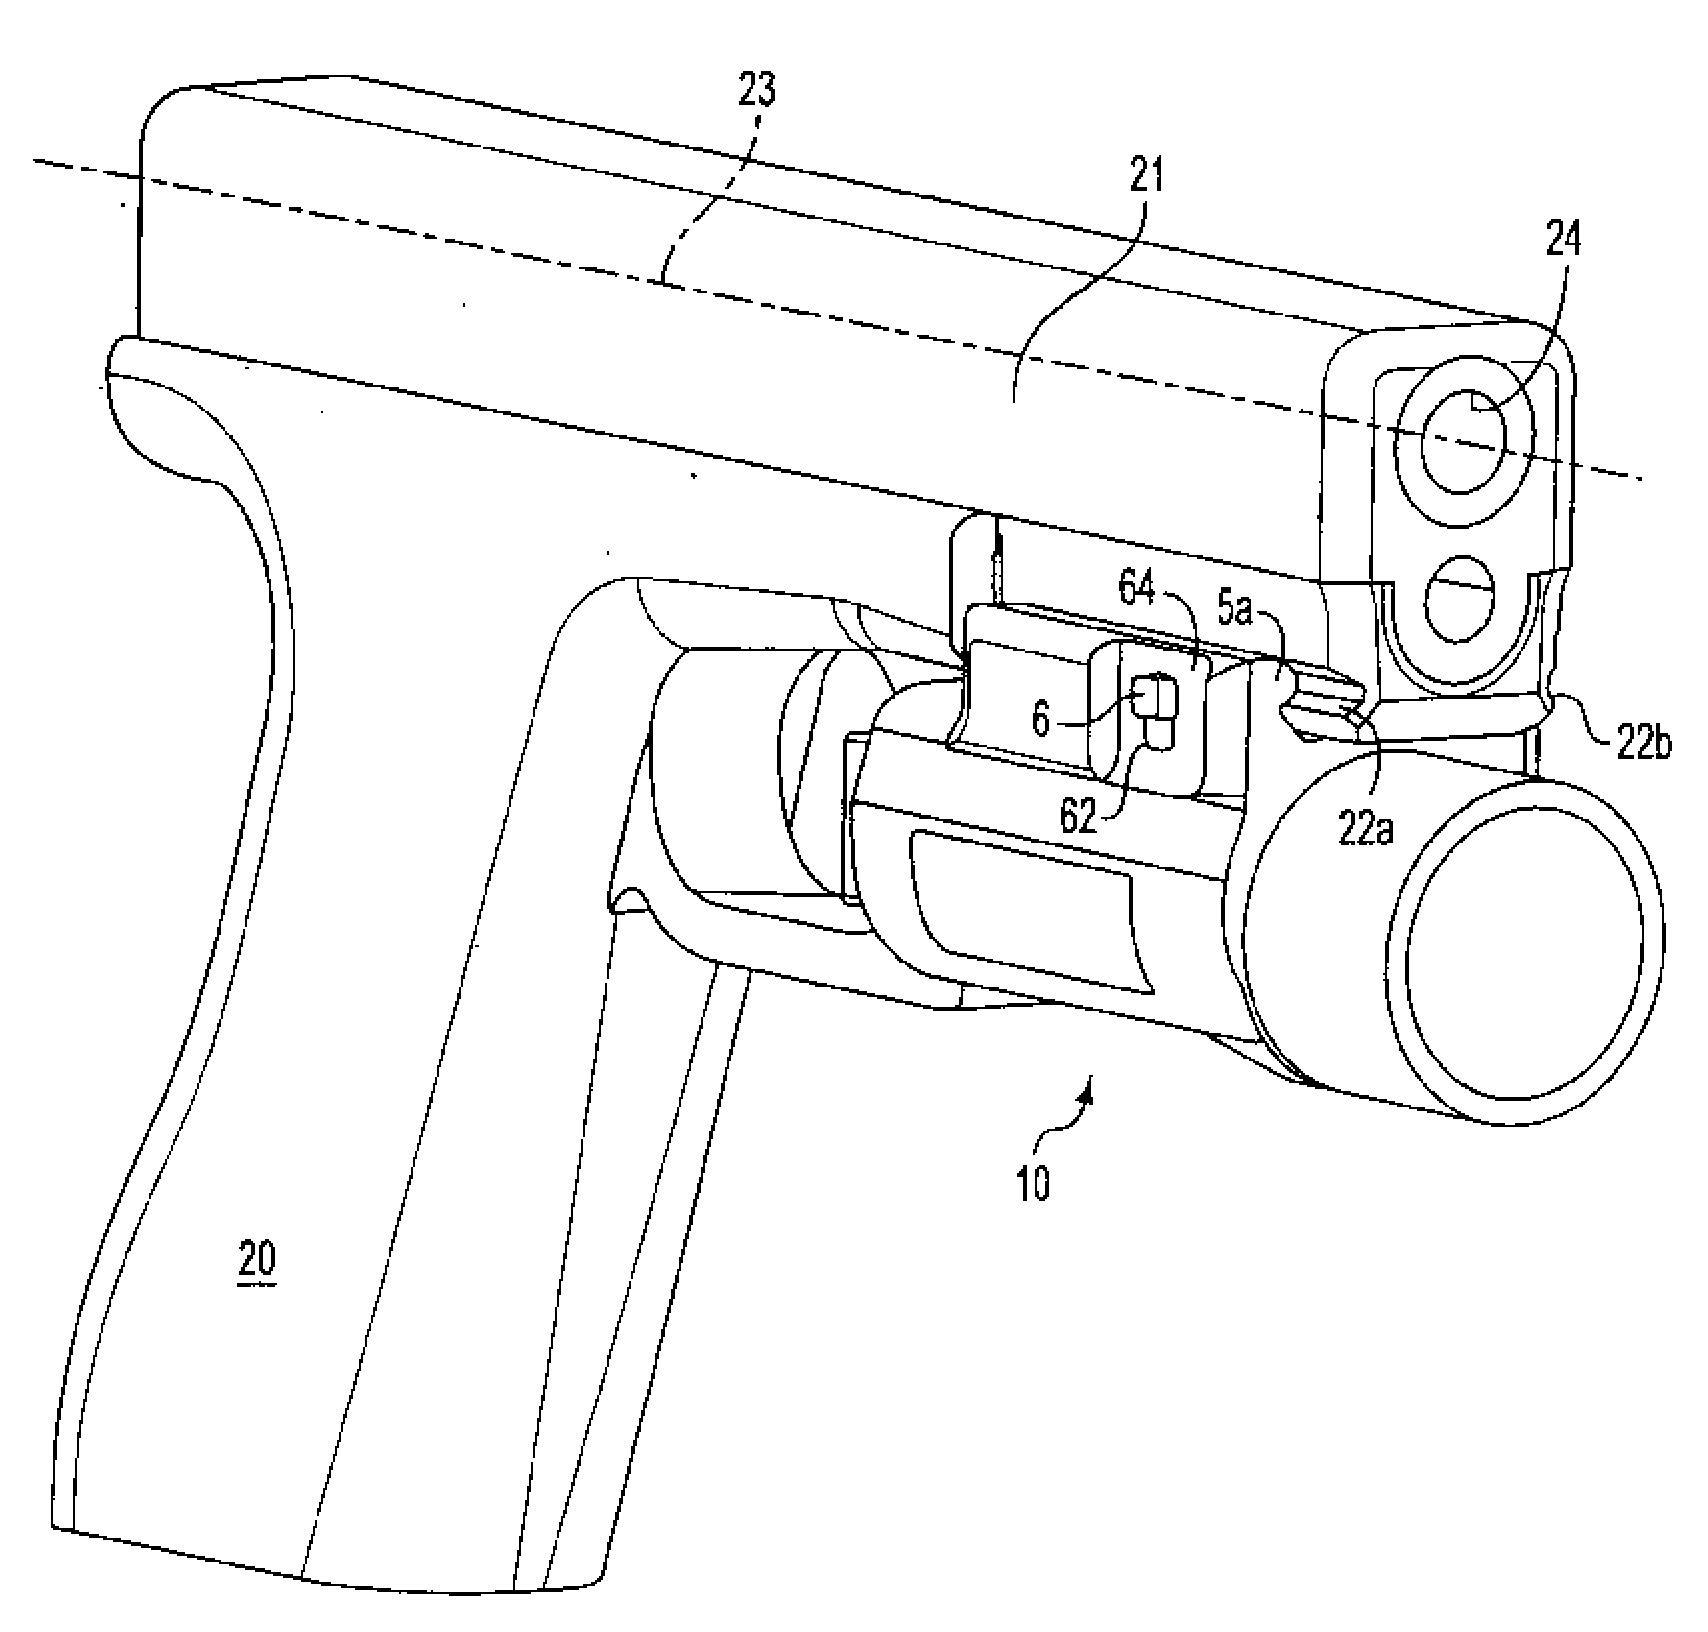 Auxiliary device for a weapon and attachment thereof